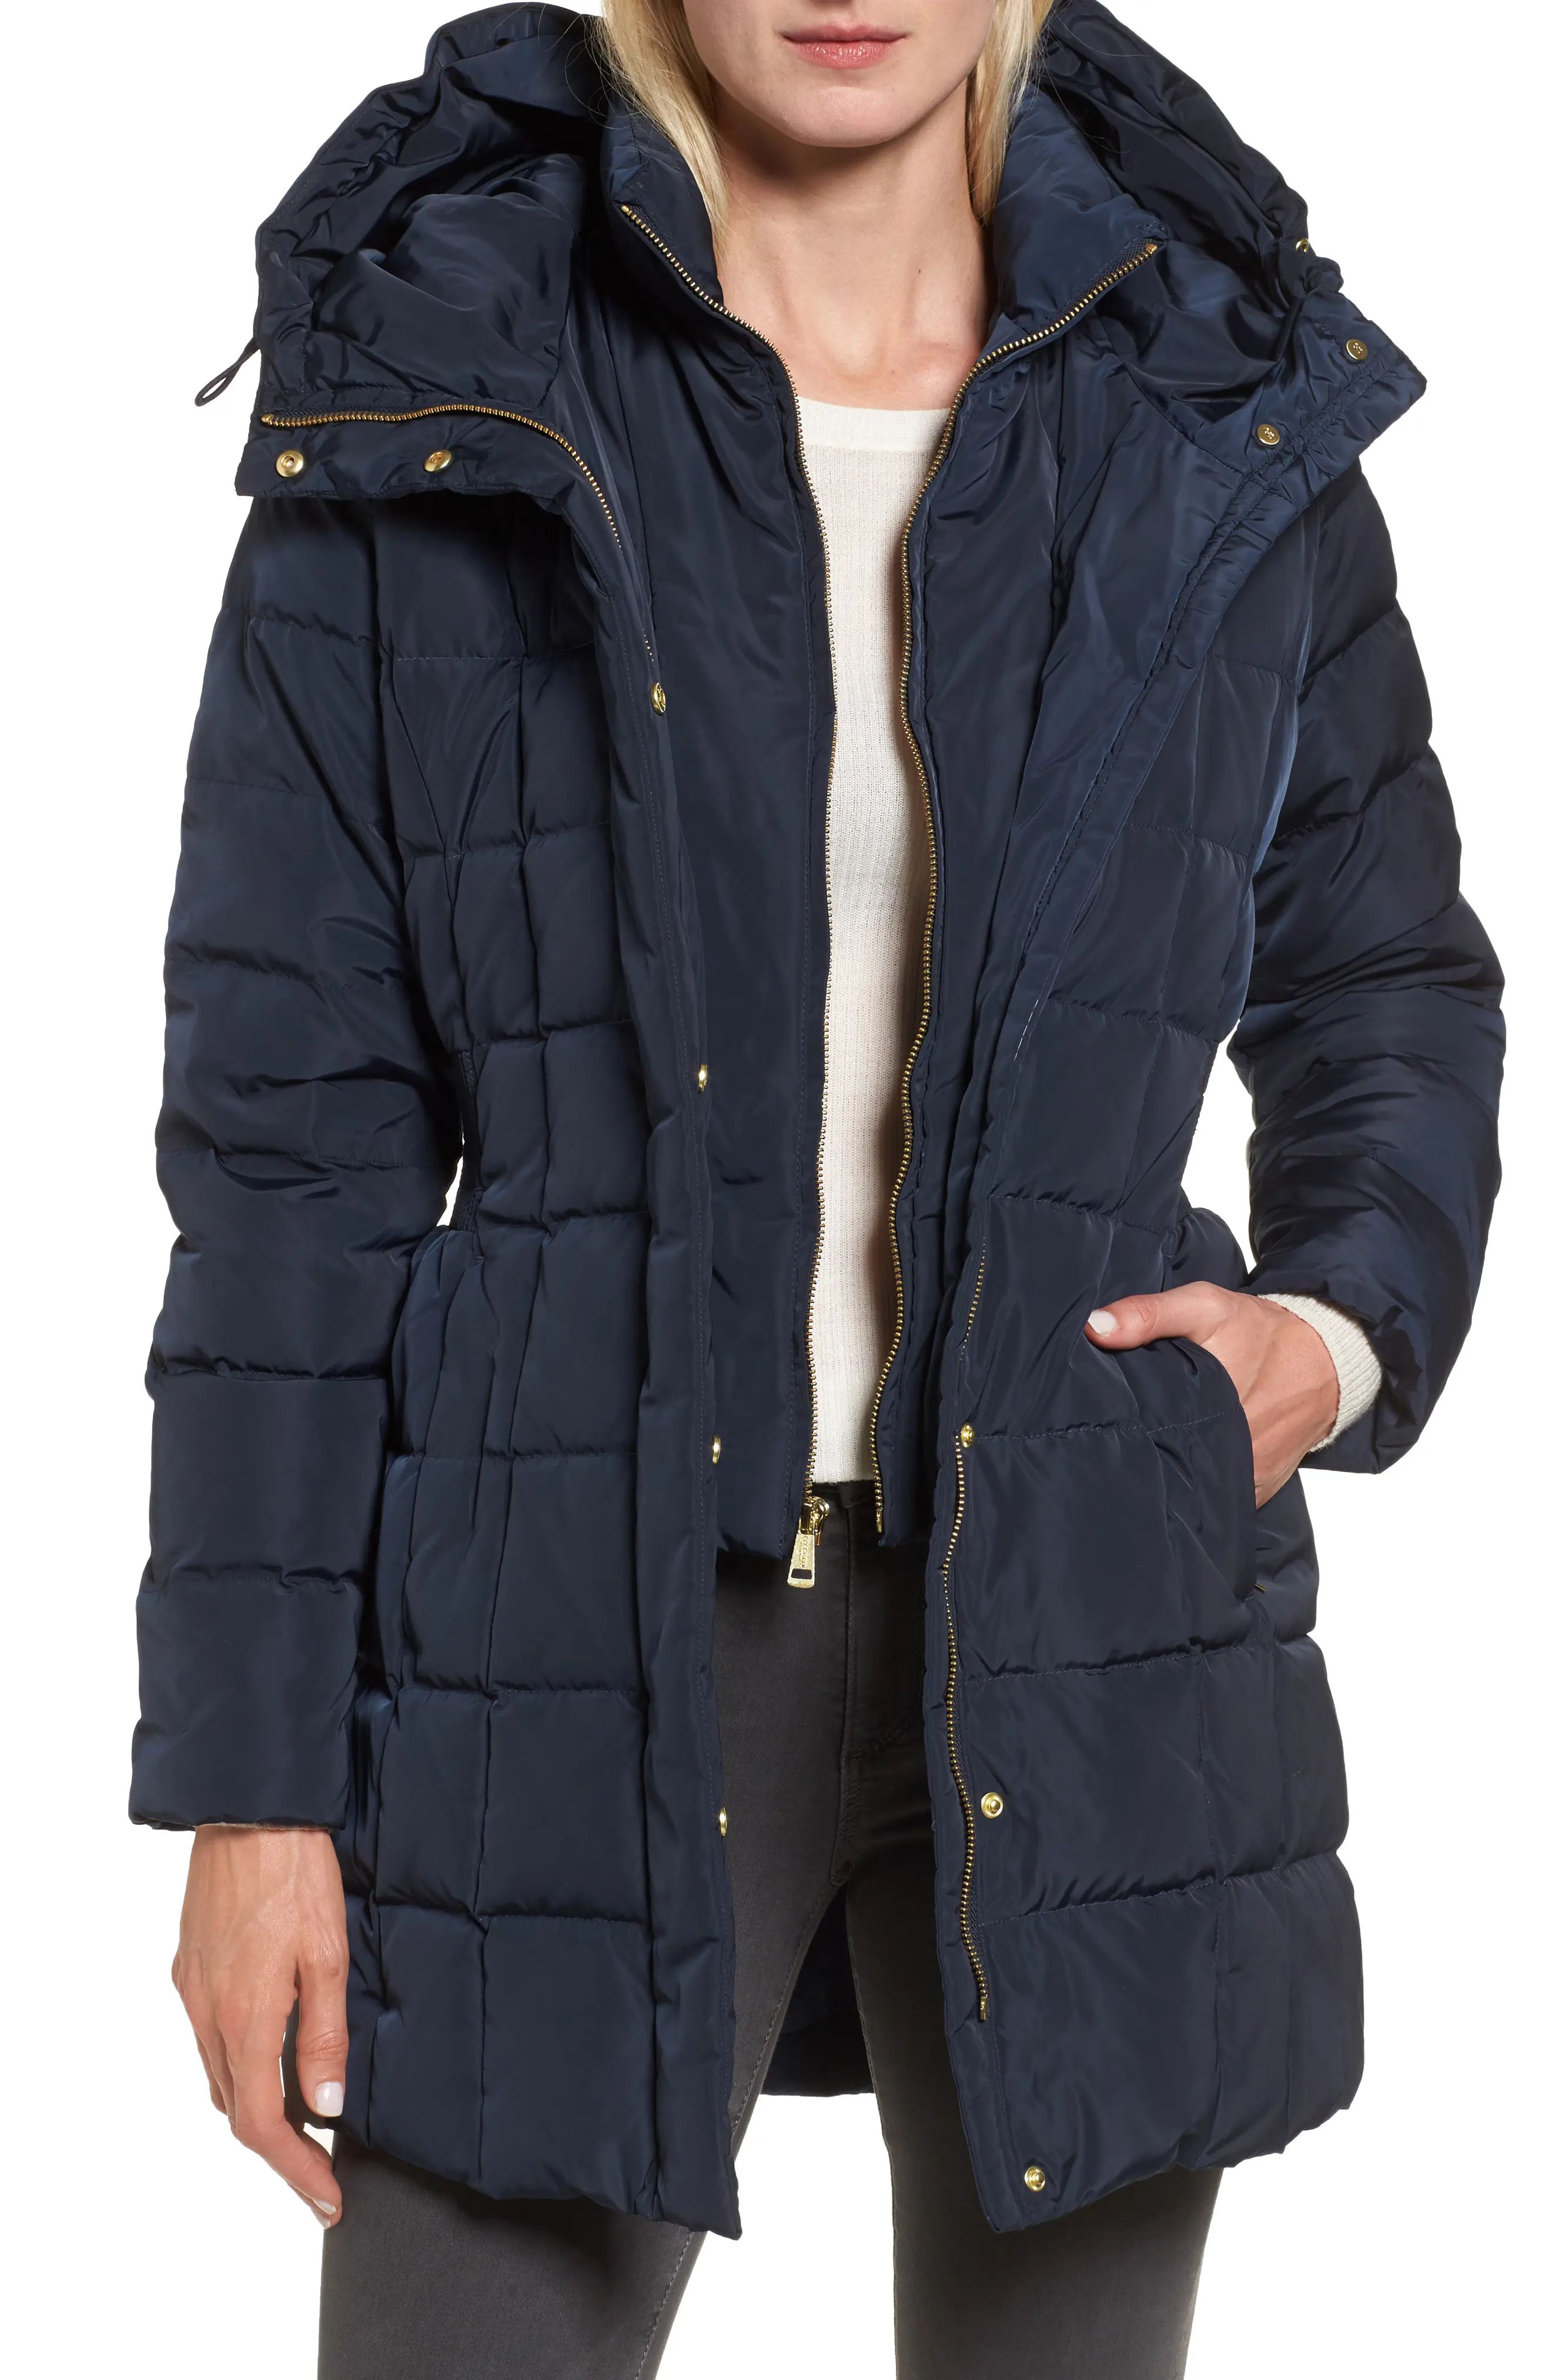 COLE HAAN SIGNATURE Cole Haan Hooded Down & Feather Jacket at Nordstrom Rack | Nordstrom Rack